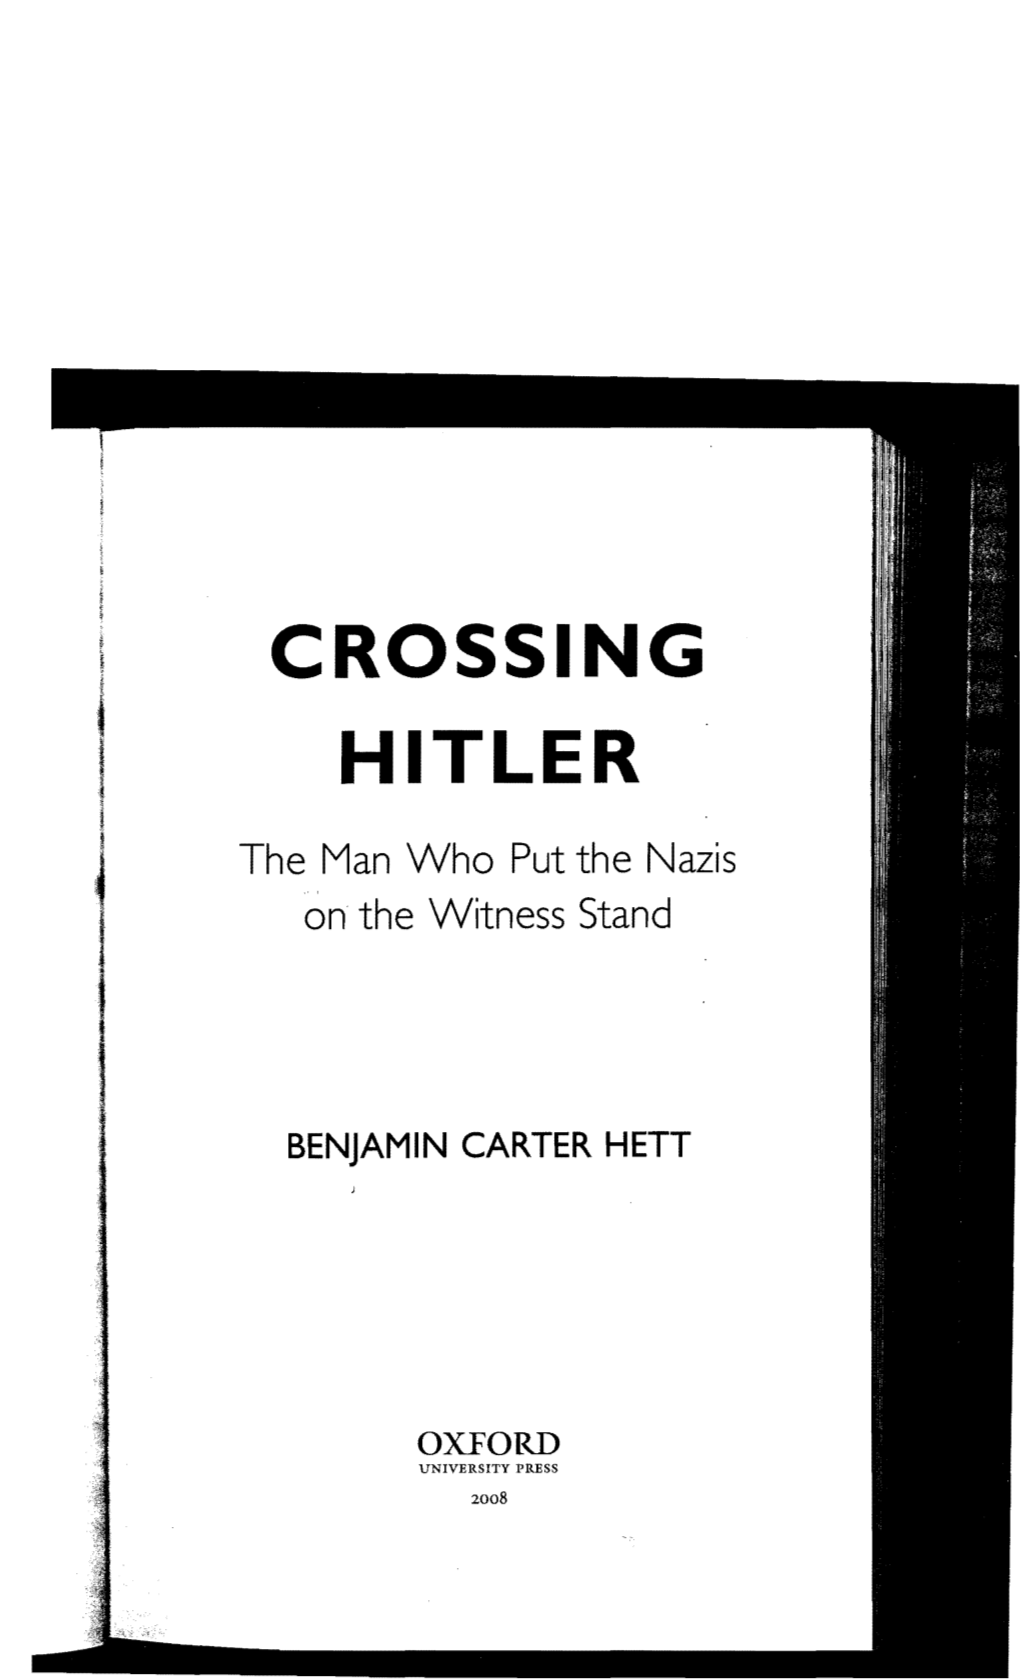 CROSSING HITLER the Man Who Put the Nazis